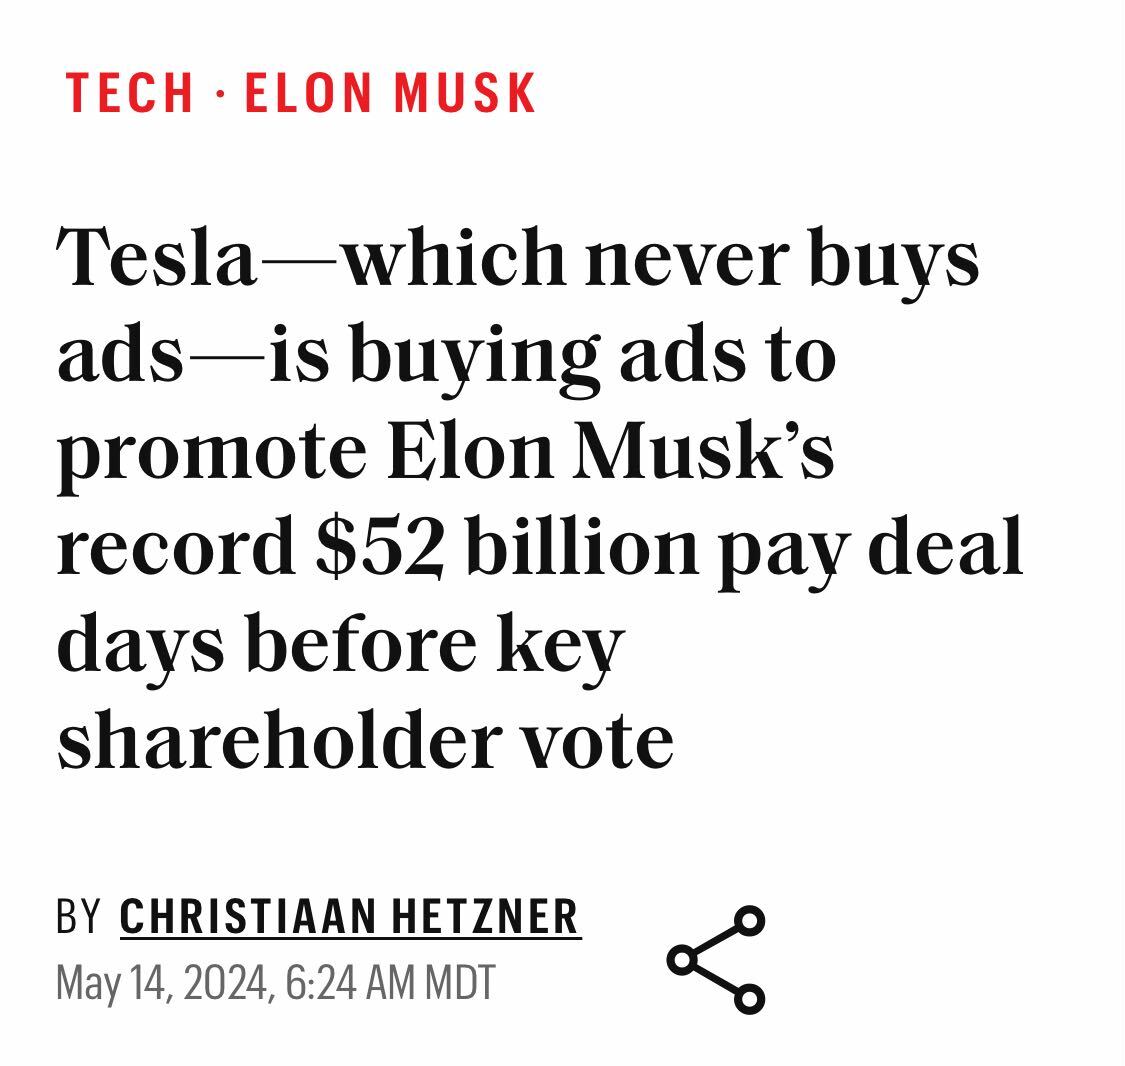 Elon Musk is now running ads saying “pay me $52 billion”